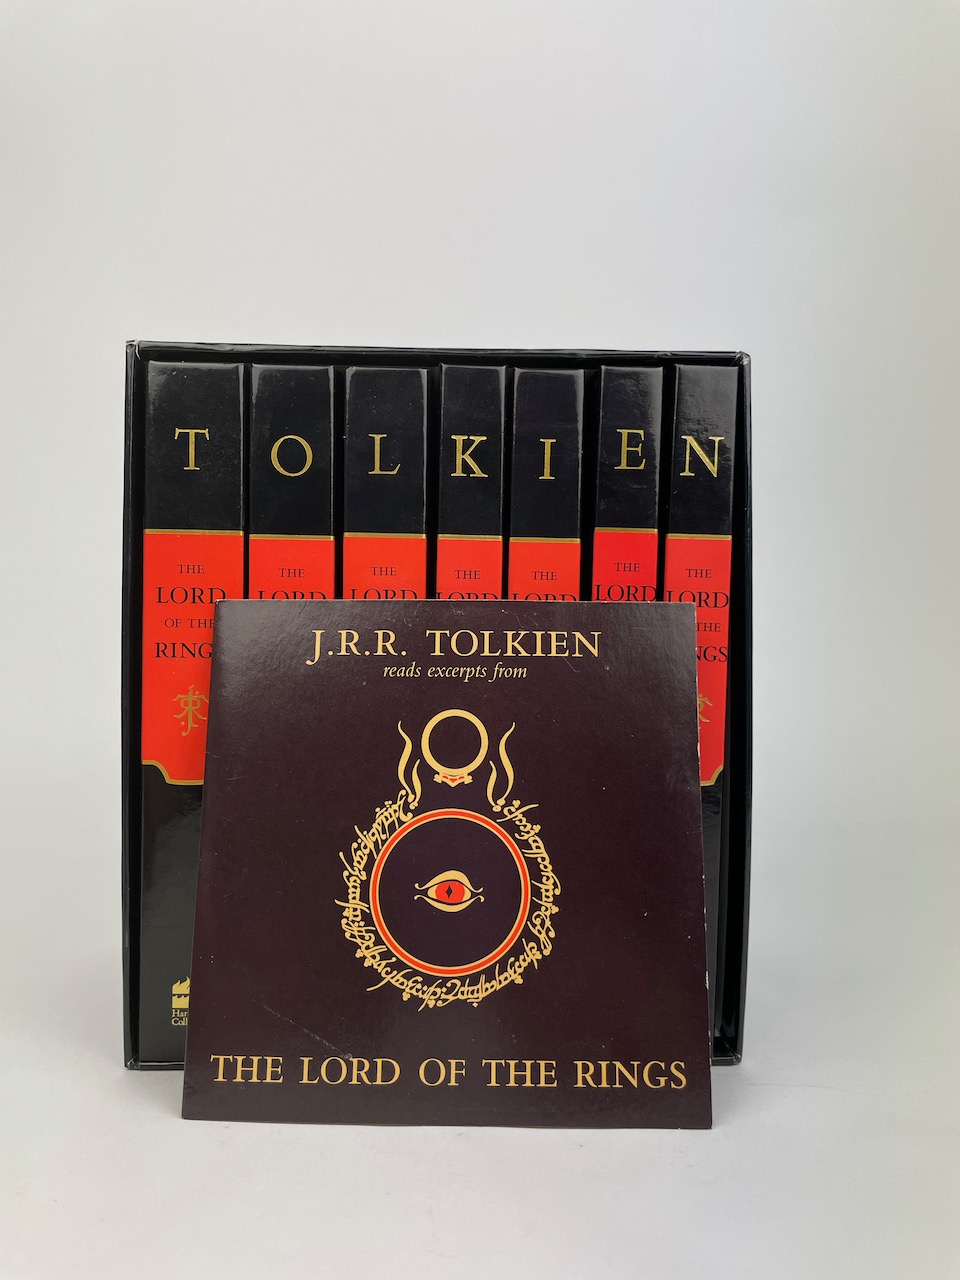 The Lord of the Rings 7 Volume Millenium Edition with CD 5